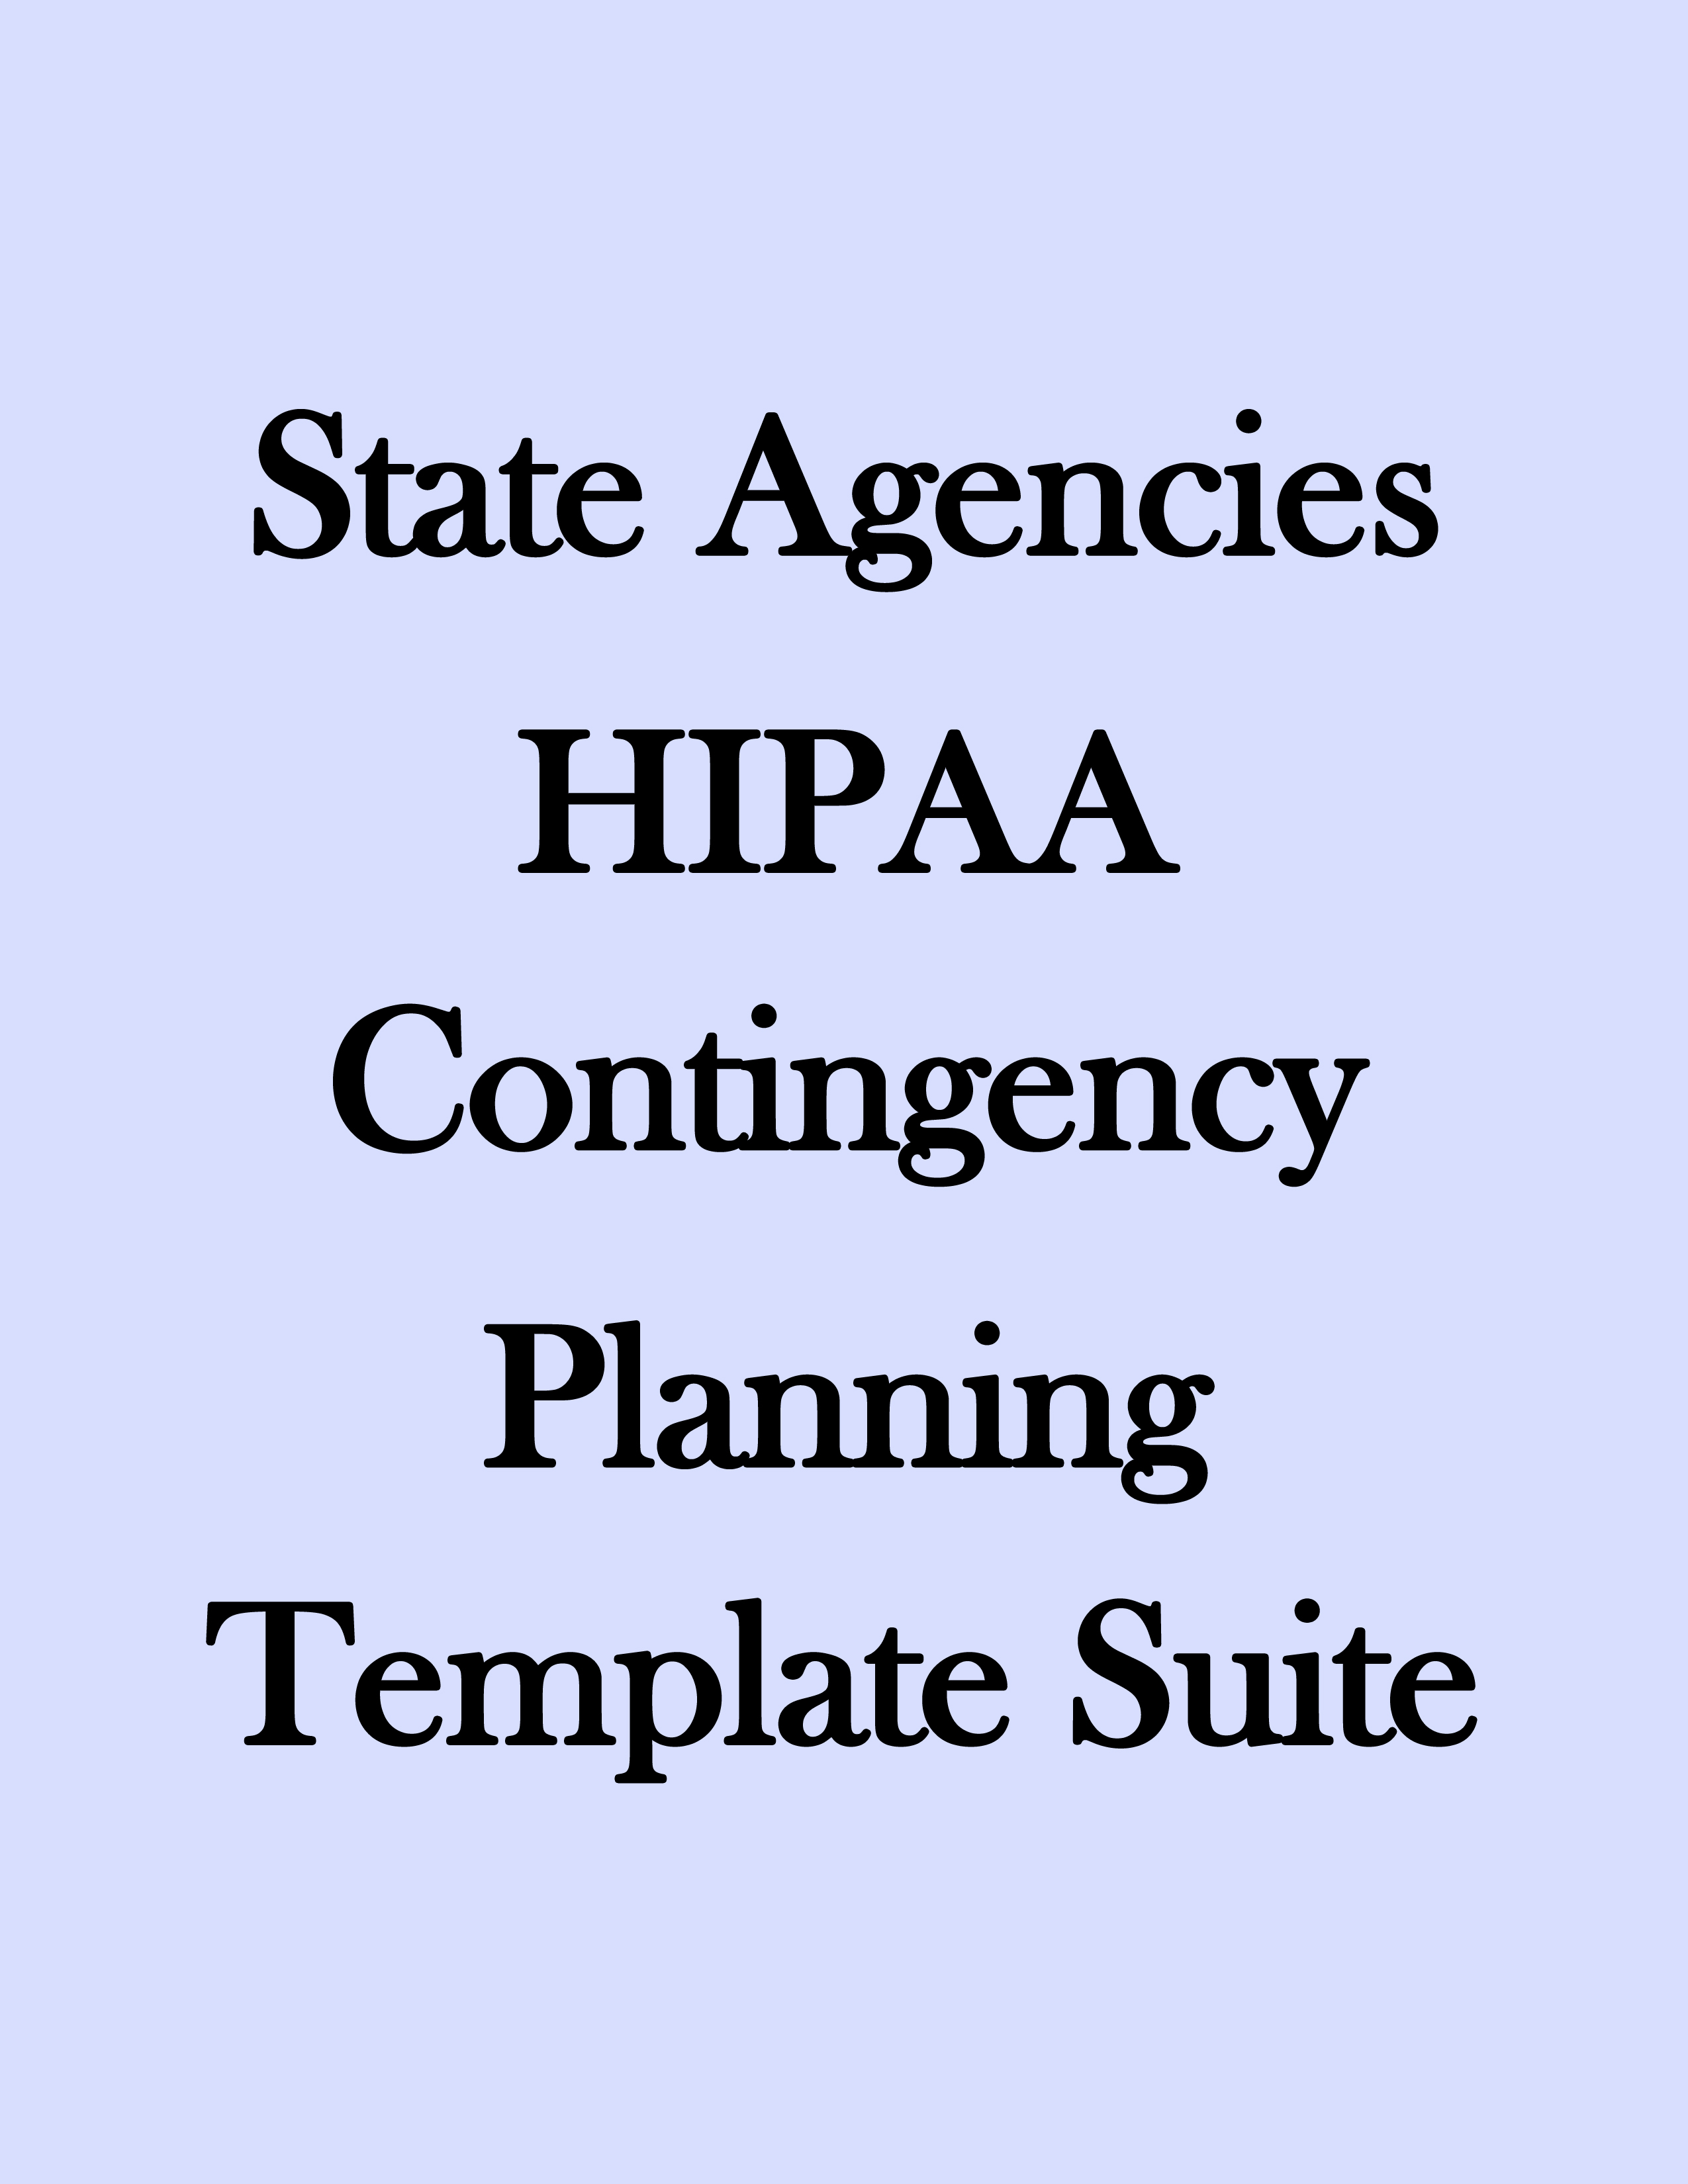 State Agencies HIPAA Contingency Planning Template Suite